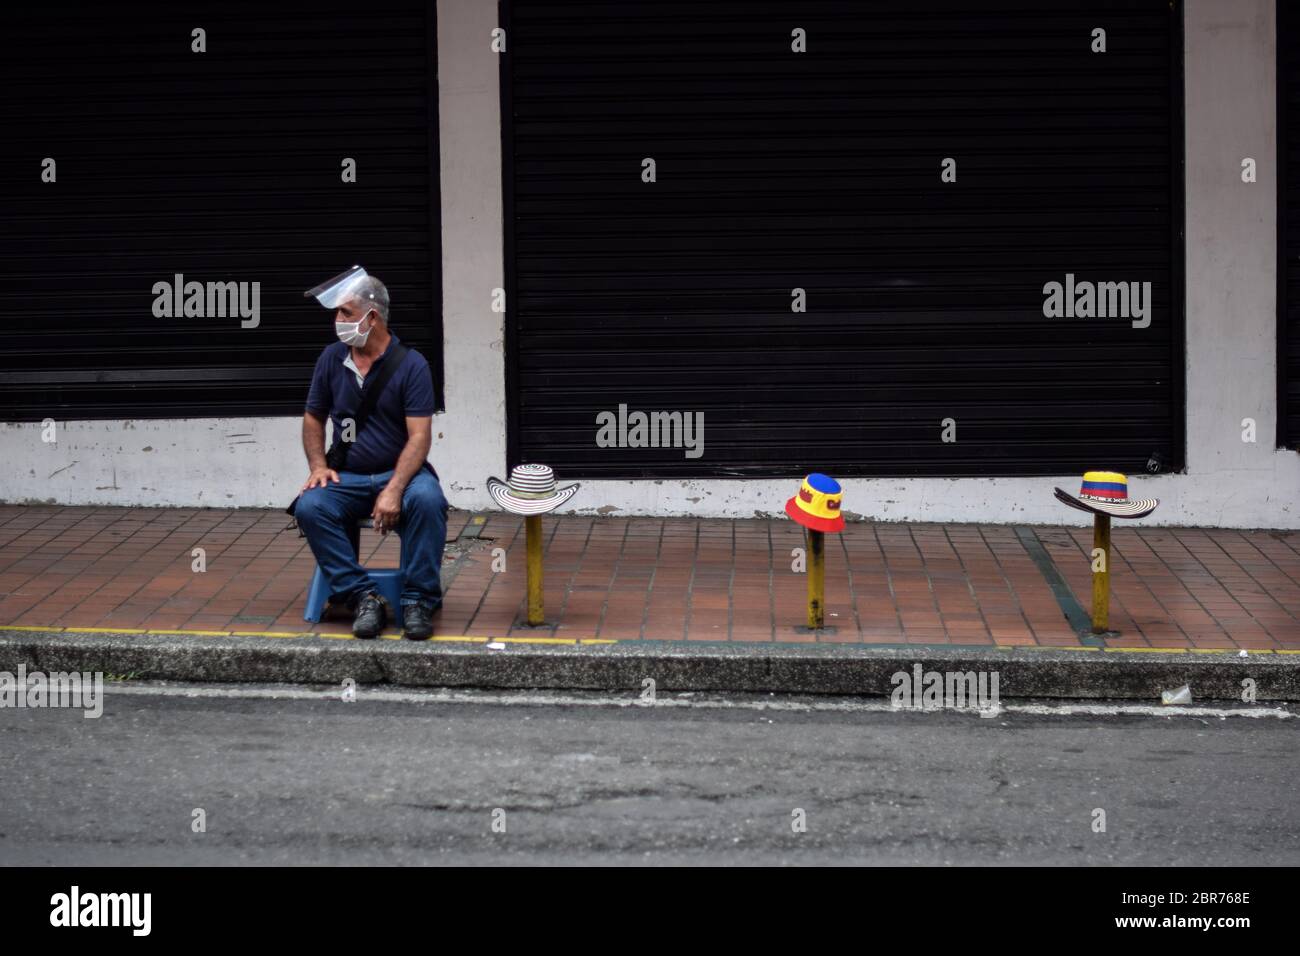 Ambulant hat seller during Coronavirus outbreak in Colombia Stock Photo